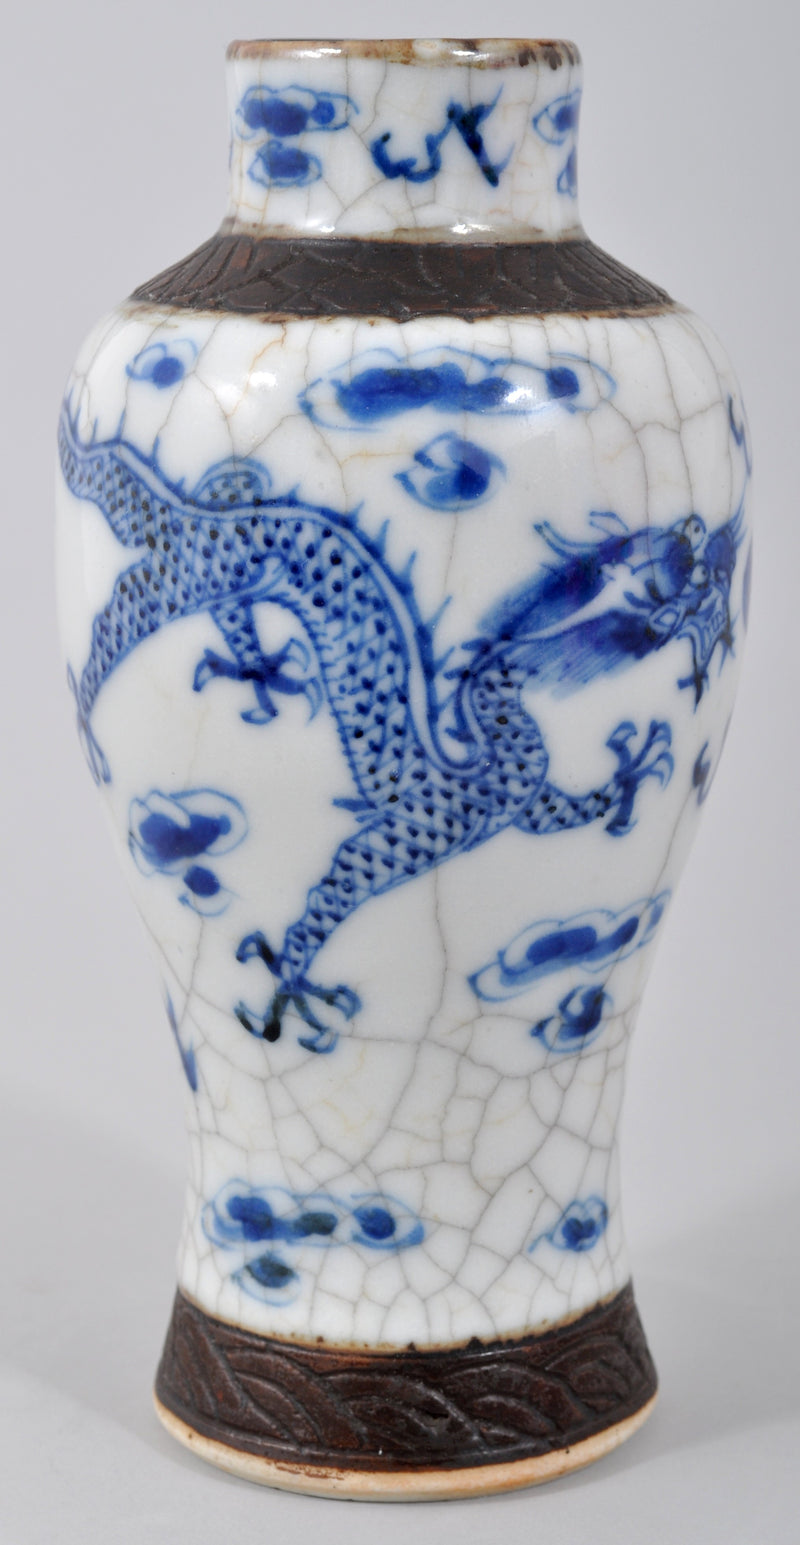 Antique 19th Century Chinese Qing Dynasty Blue and White Crackle-Glazed Vase, Circa 1850